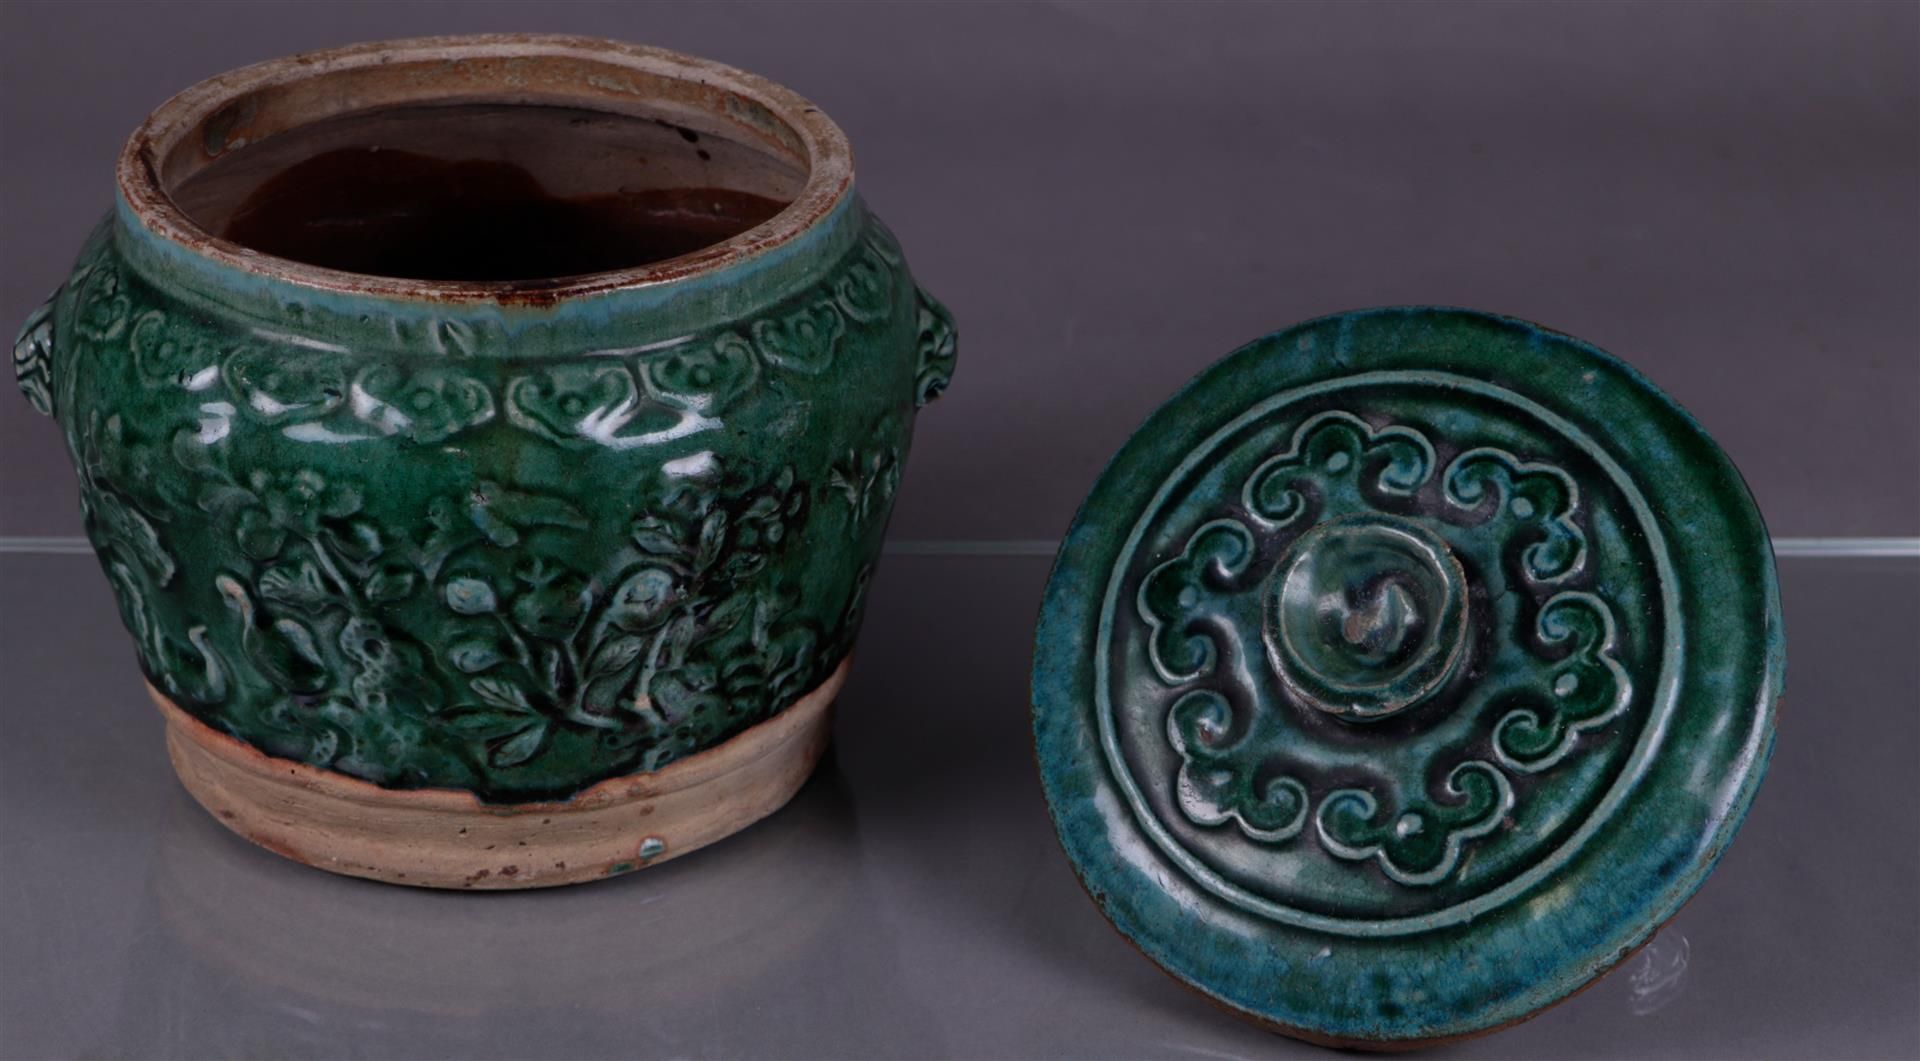 A green glazed lidded container. China, Ming?
Diam. 24 cm. - Image 3 of 4